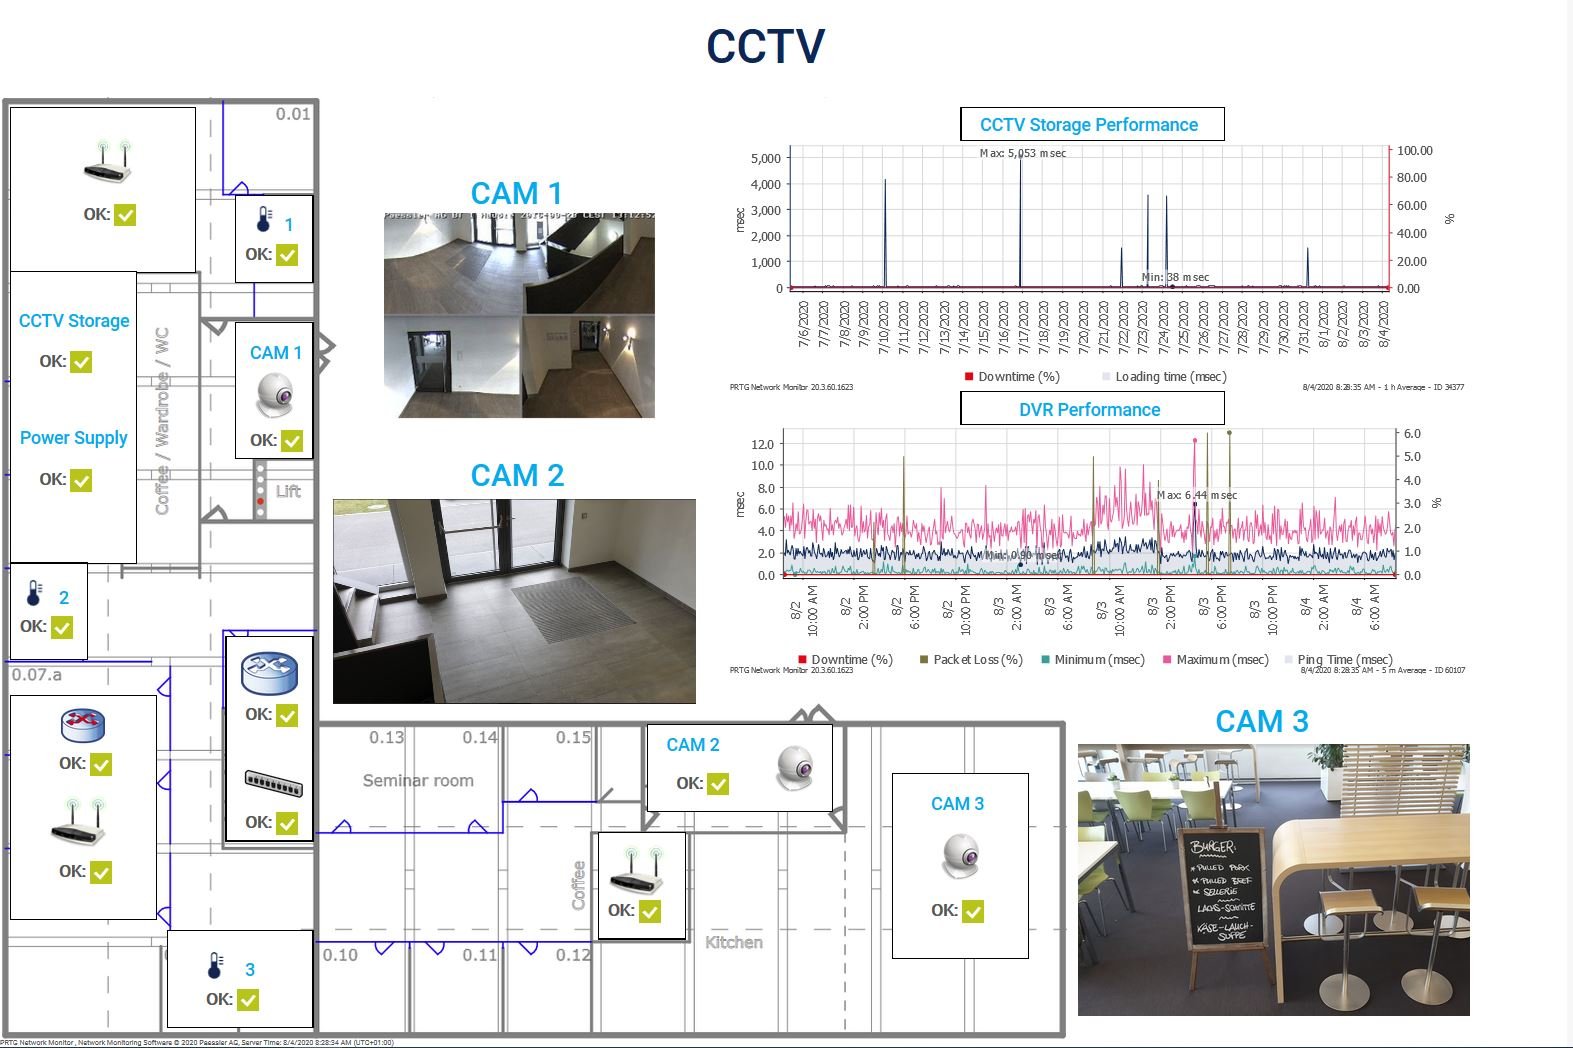 Stay informed about what's going on in your headquarters with a CCTV monitoring dashboard